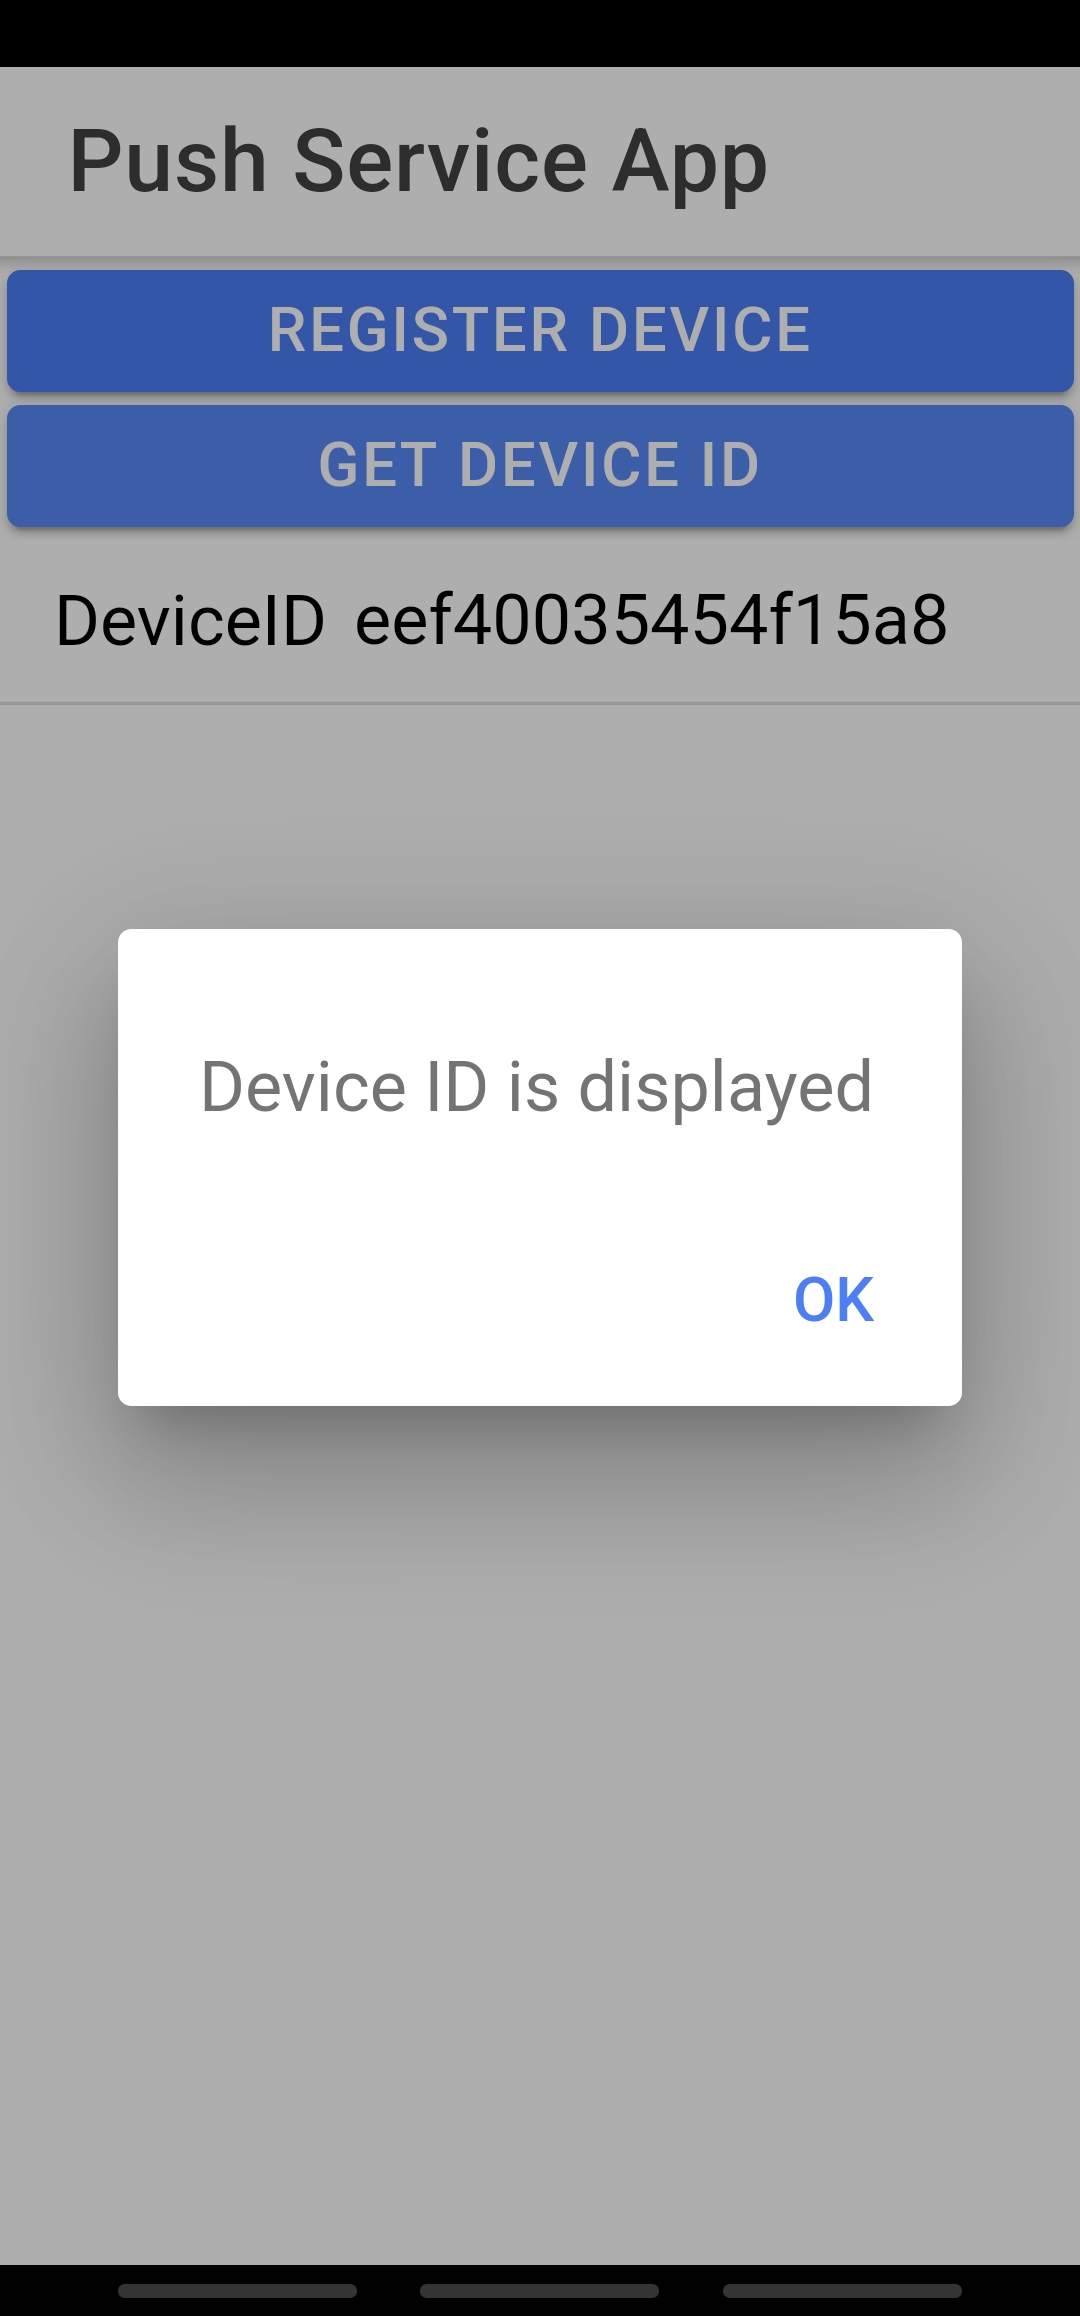 Android Device ID displayed on the device screen